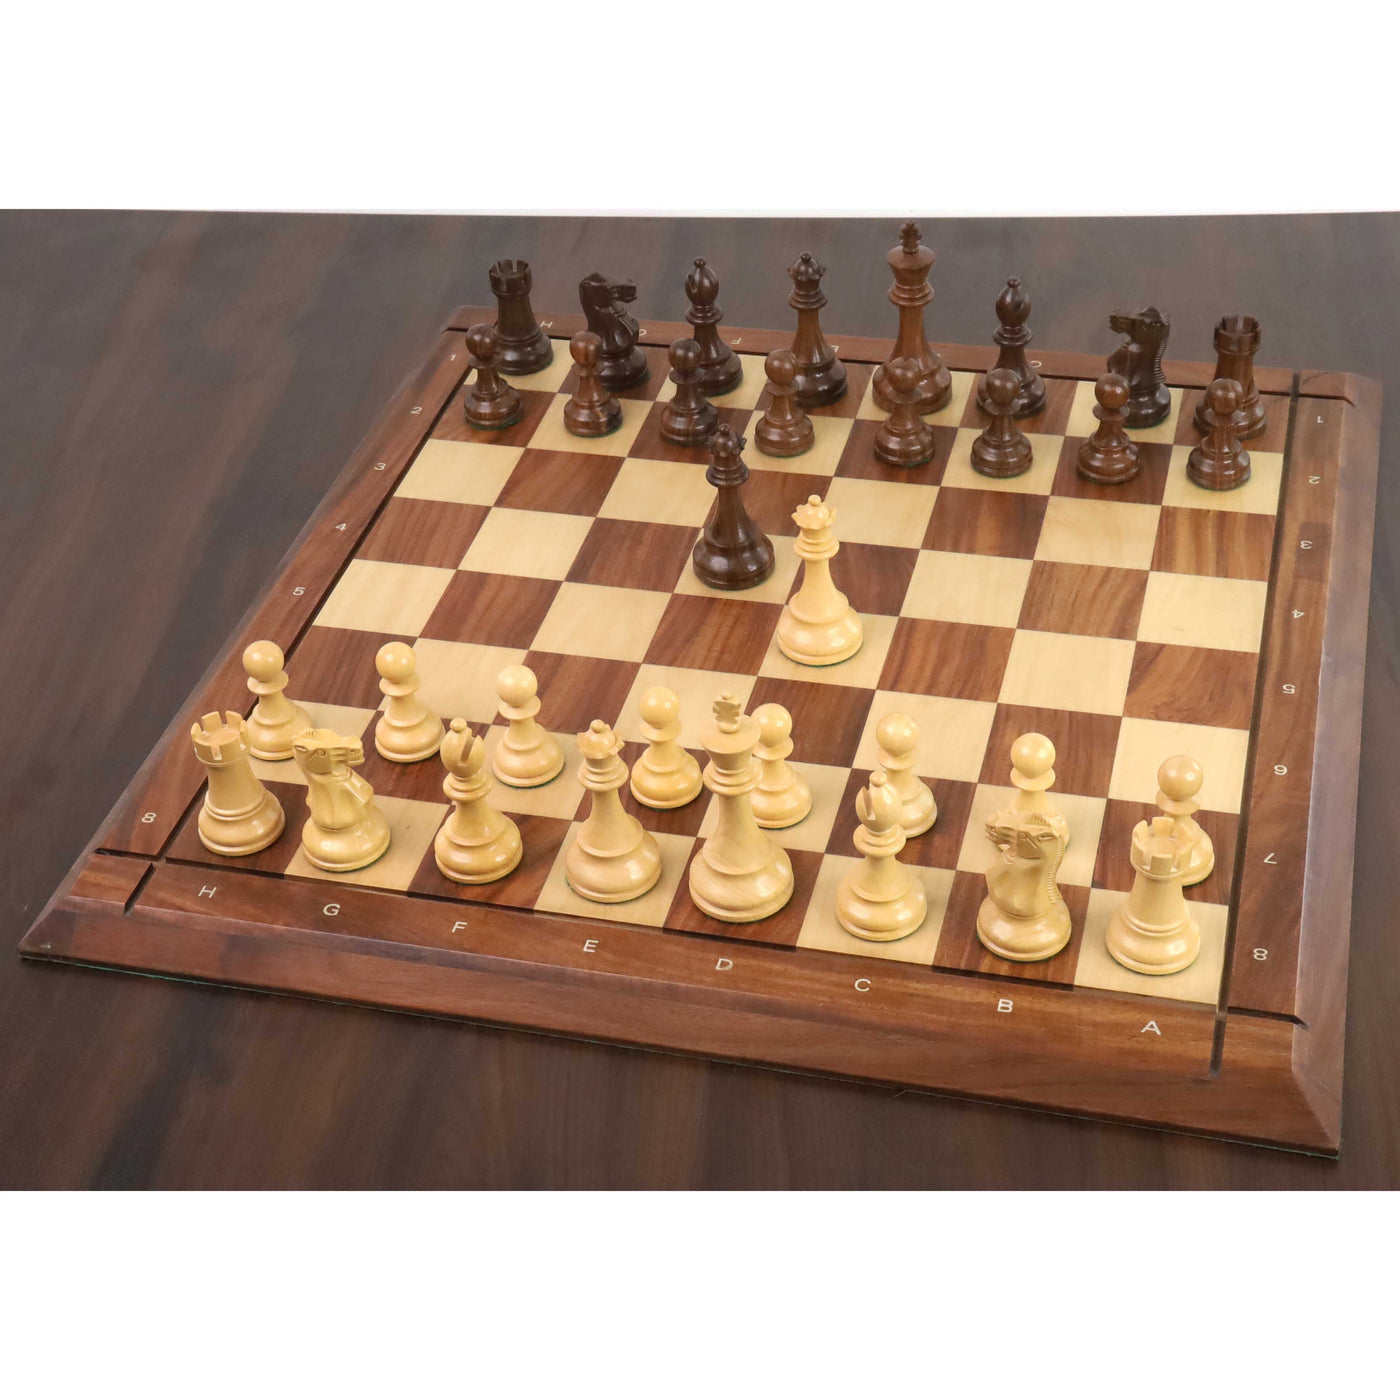 4.1" New Classic Staunton Wooden Chess Set - Chess Pieces Only -Weighted Golden Rosewood